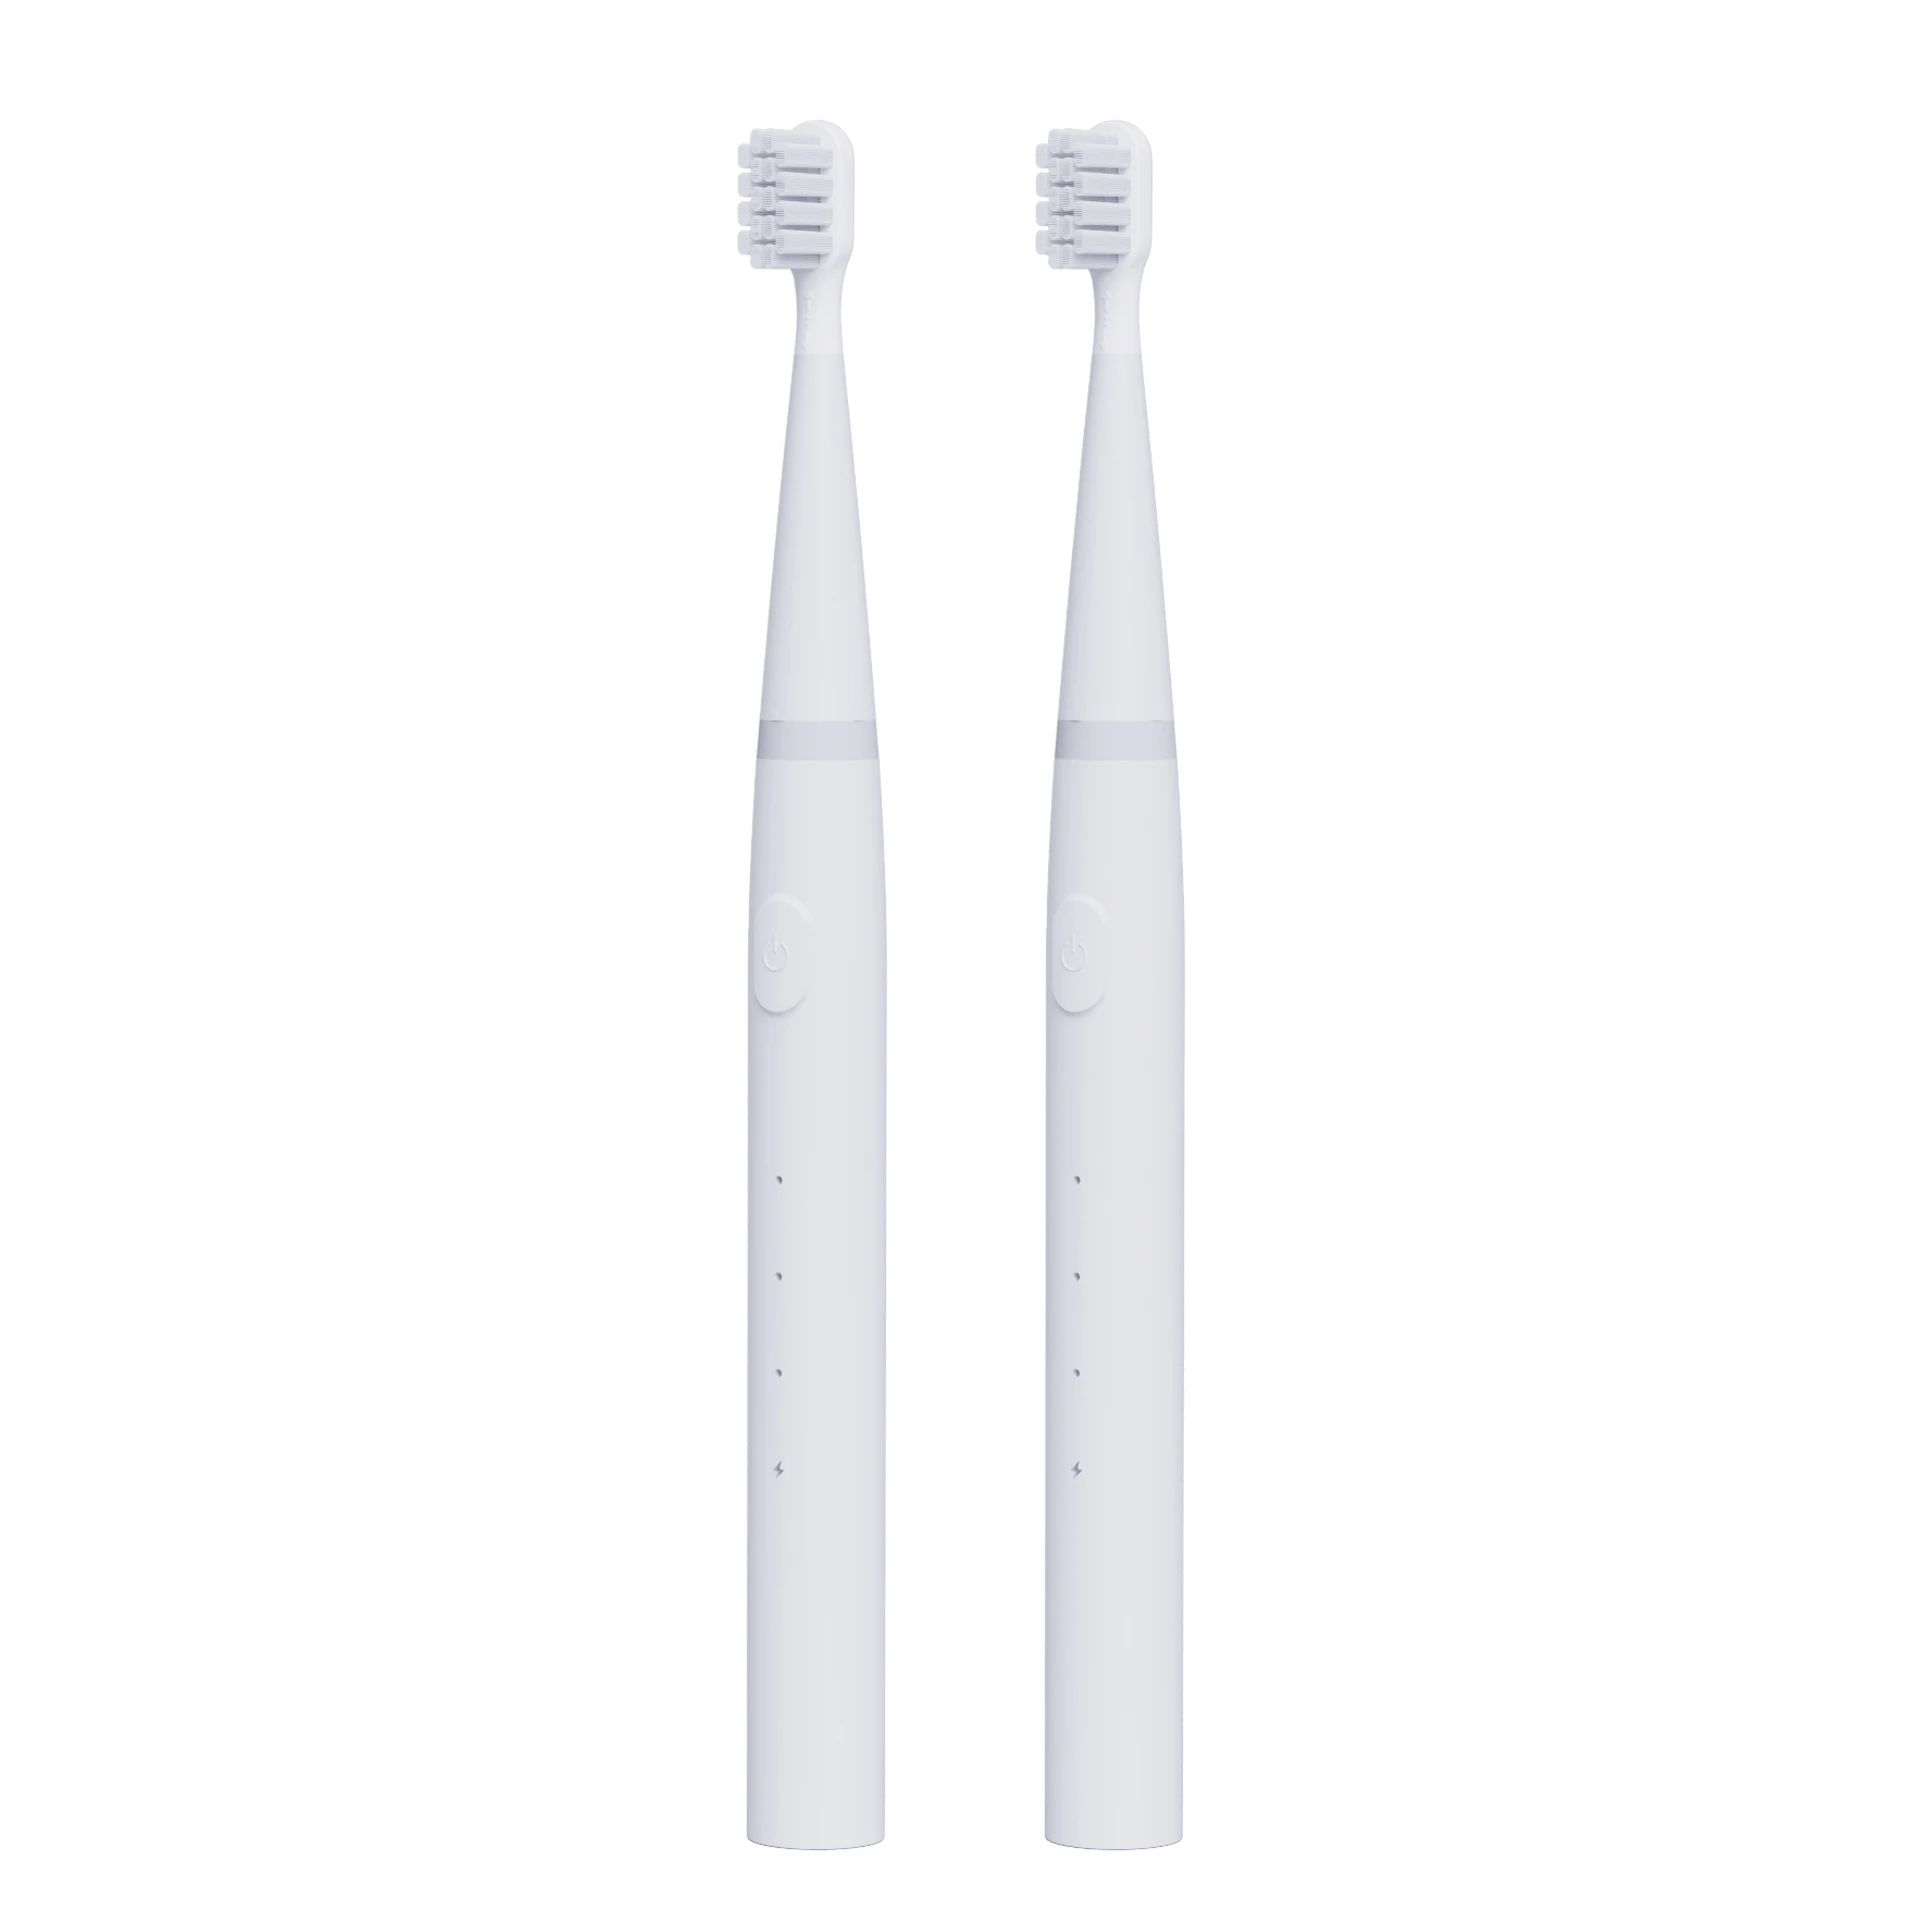 

Cheap Price Dental Oral Care Mini Replaceable Battery Electric Toothbrush Old Body Sonic Toothbrushes